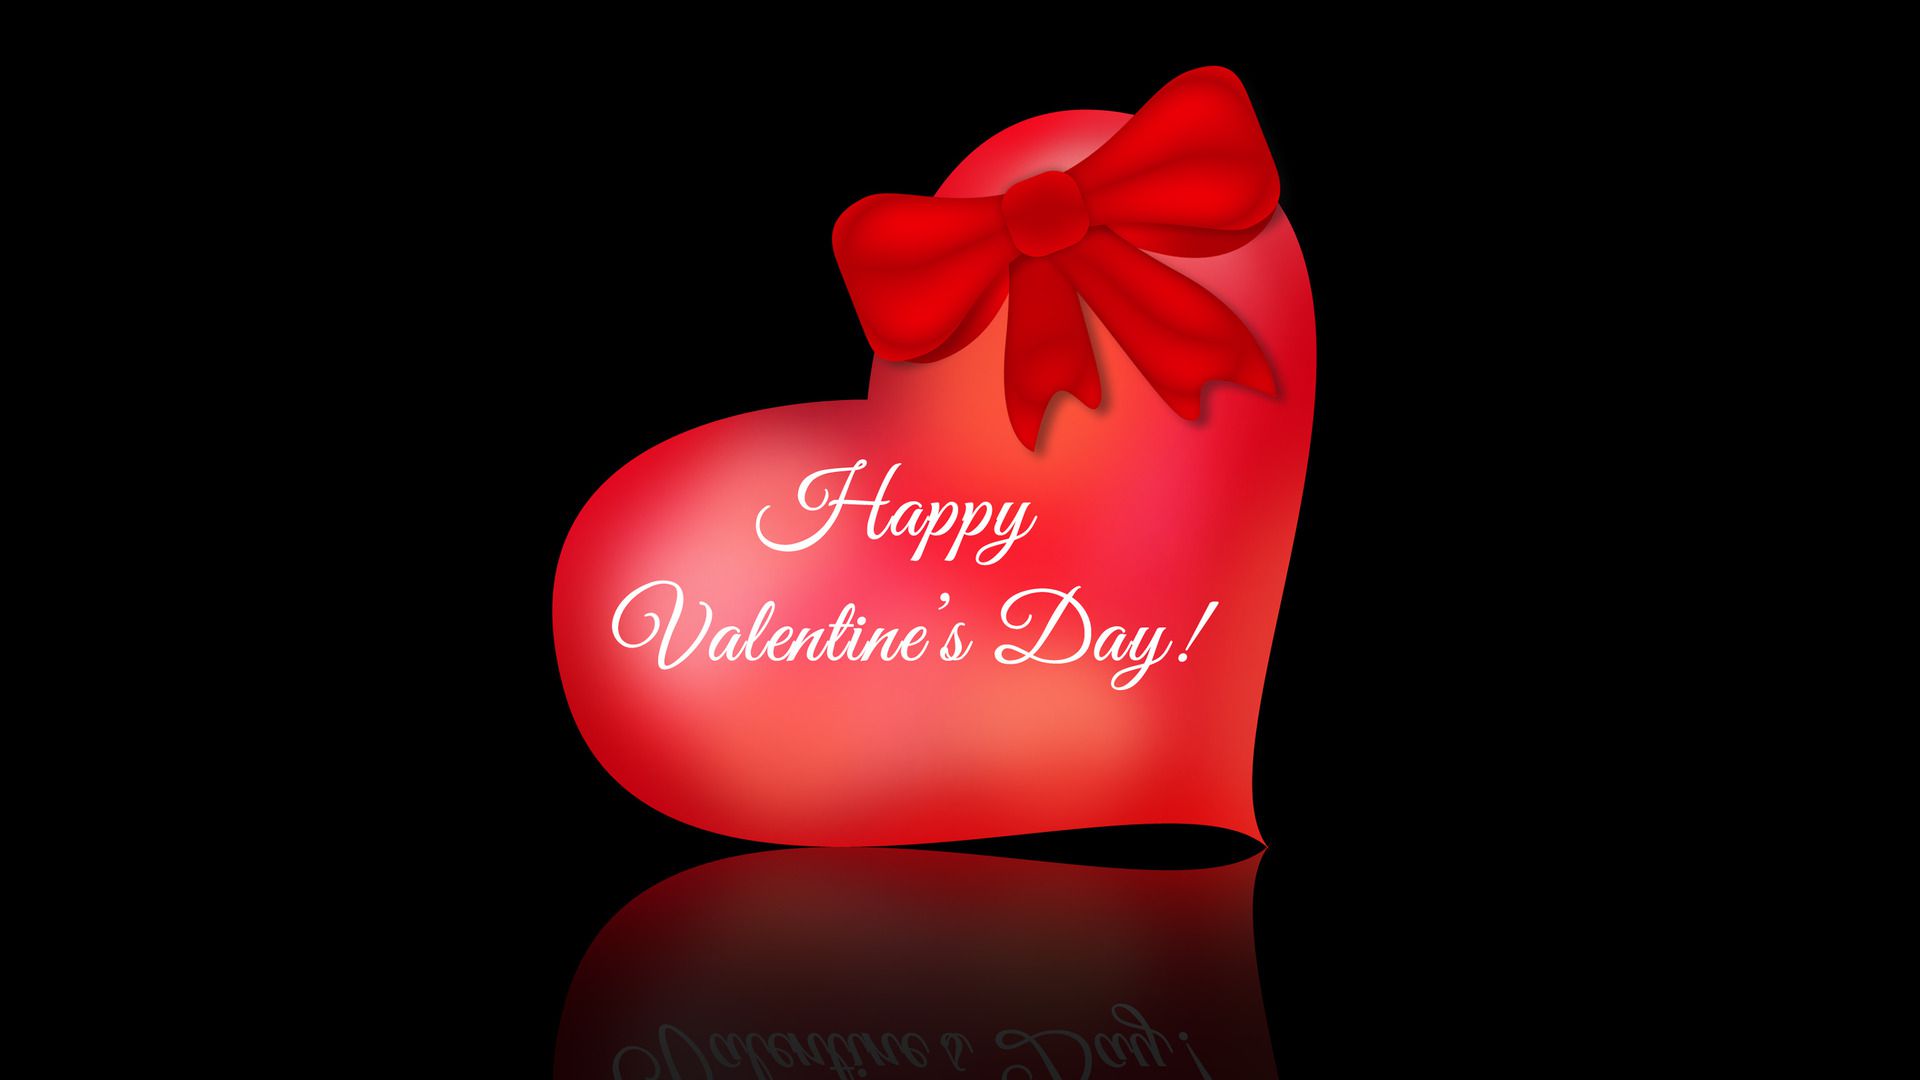 Happy Valentine Day Image Hd , HD Wallpaper & Backgrounds